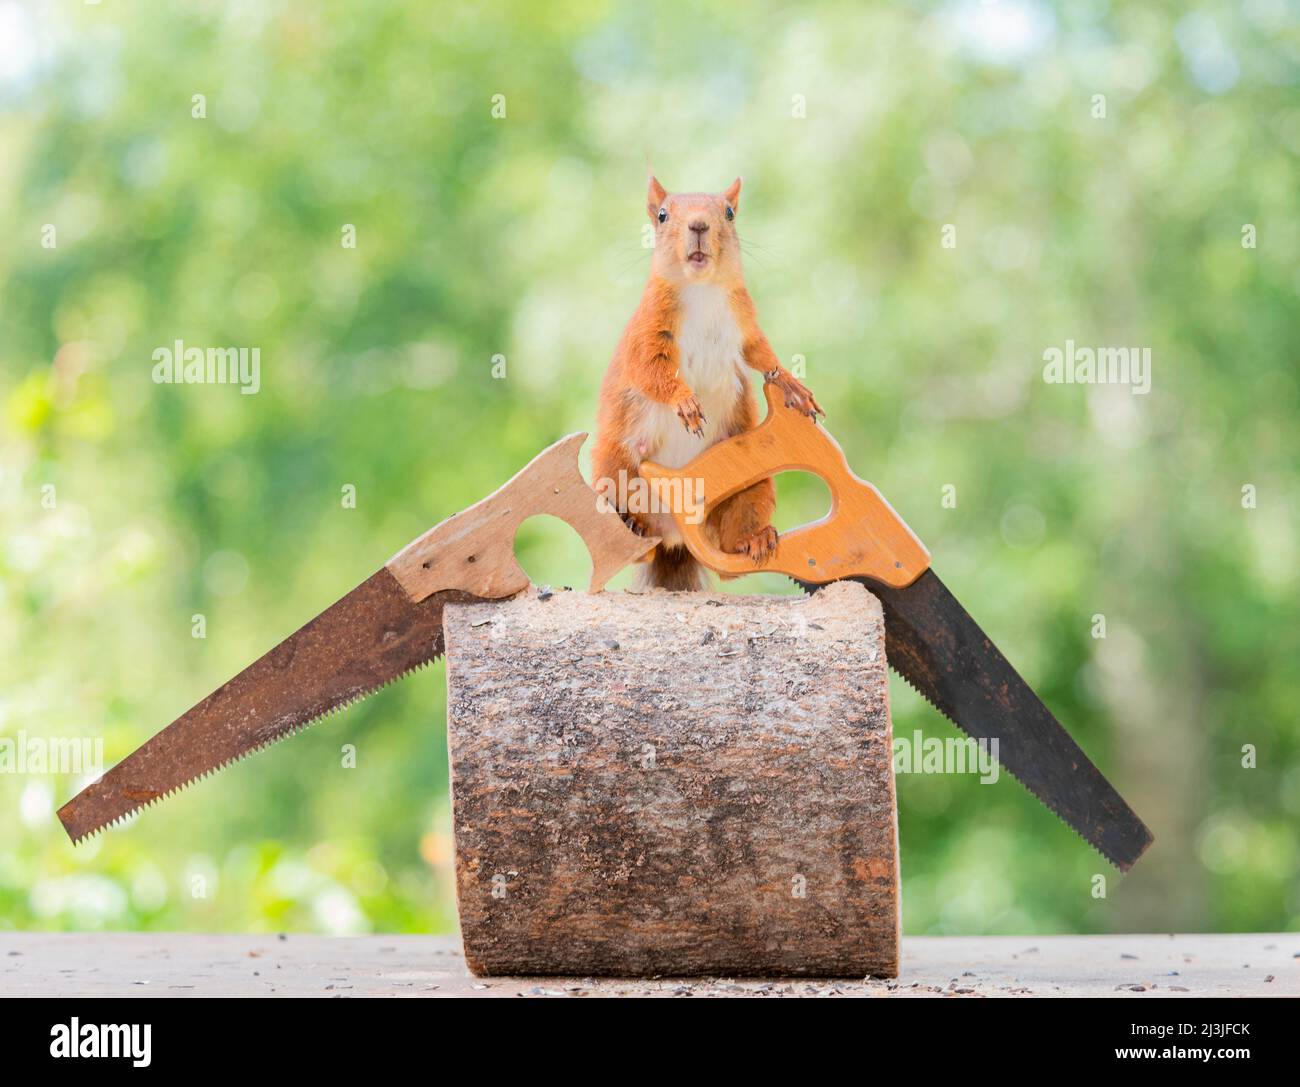 Squirrel with saws on wooden trunk Stock Photo